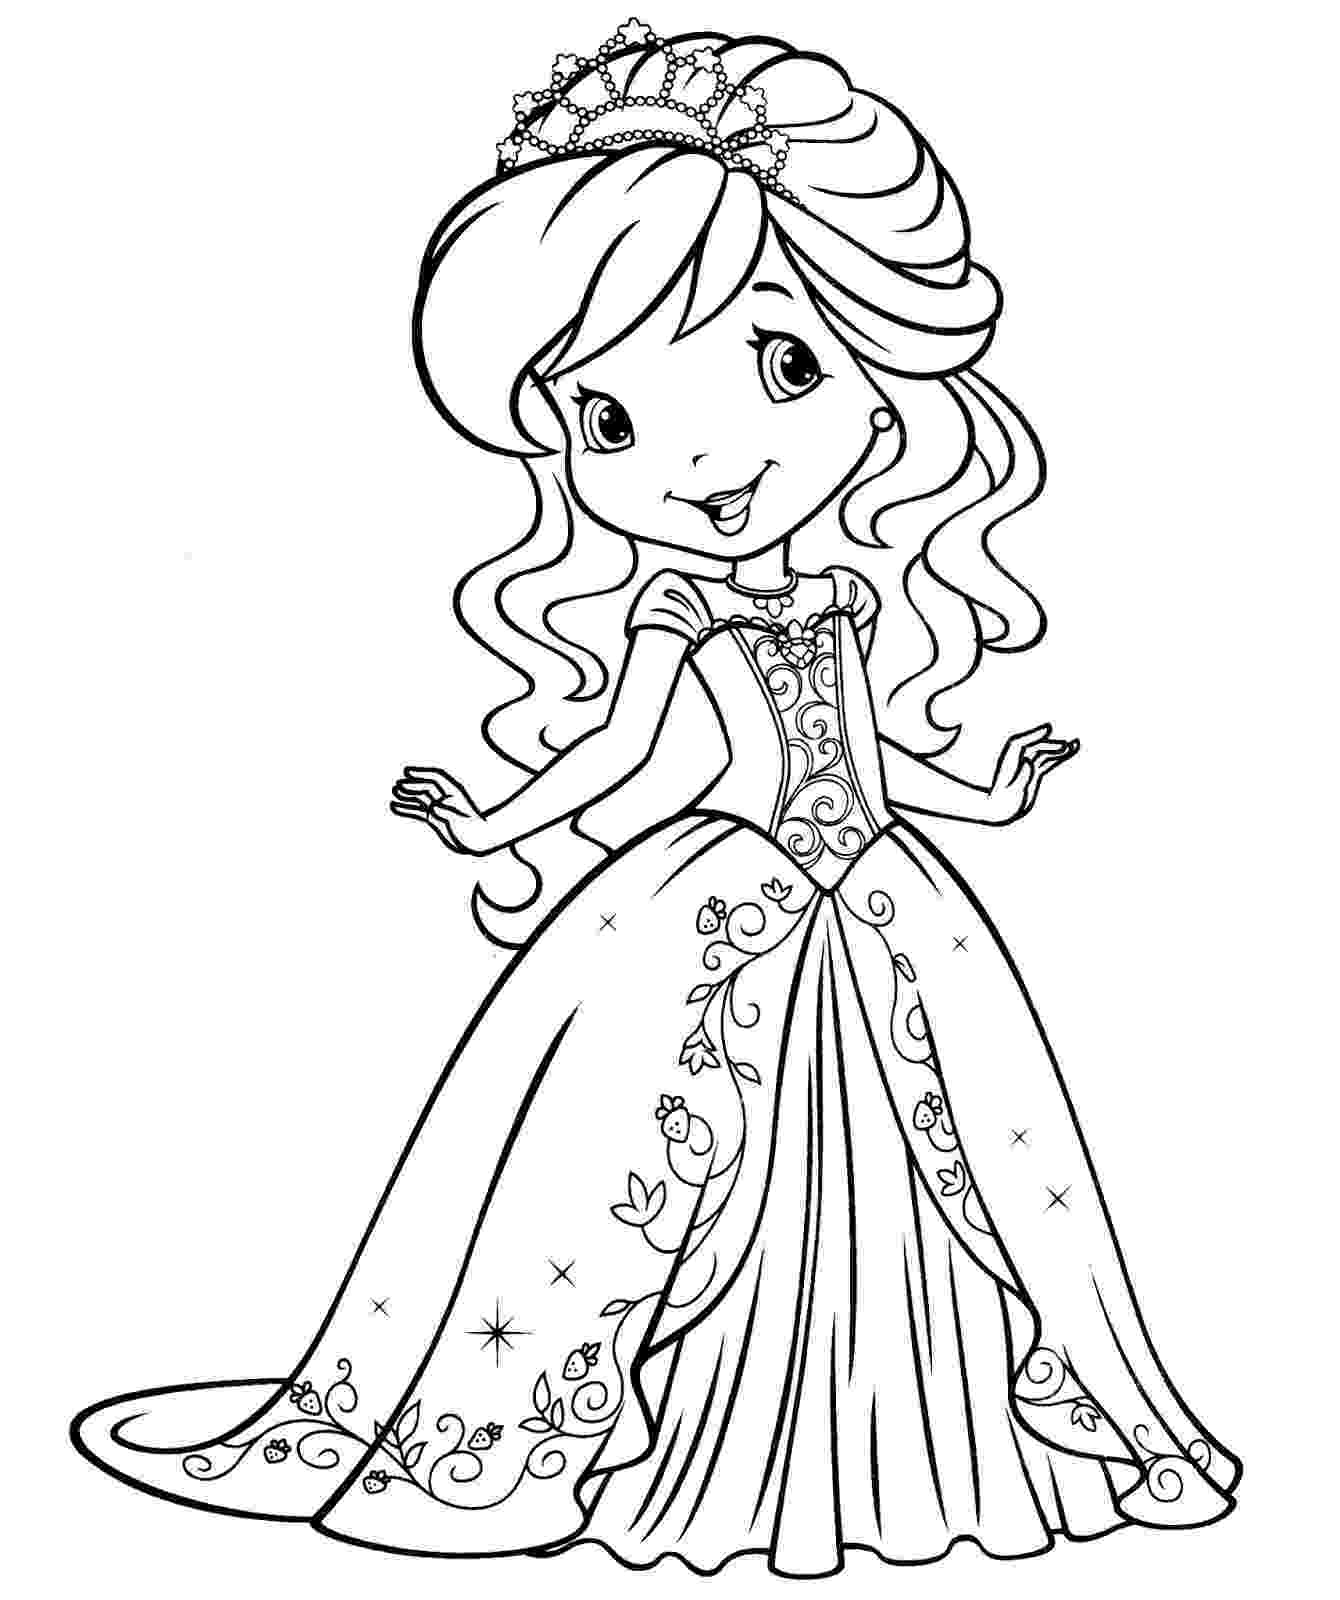 colouring pages to print for girls coloring pages for girls dr odd colouring print pages for to girls 